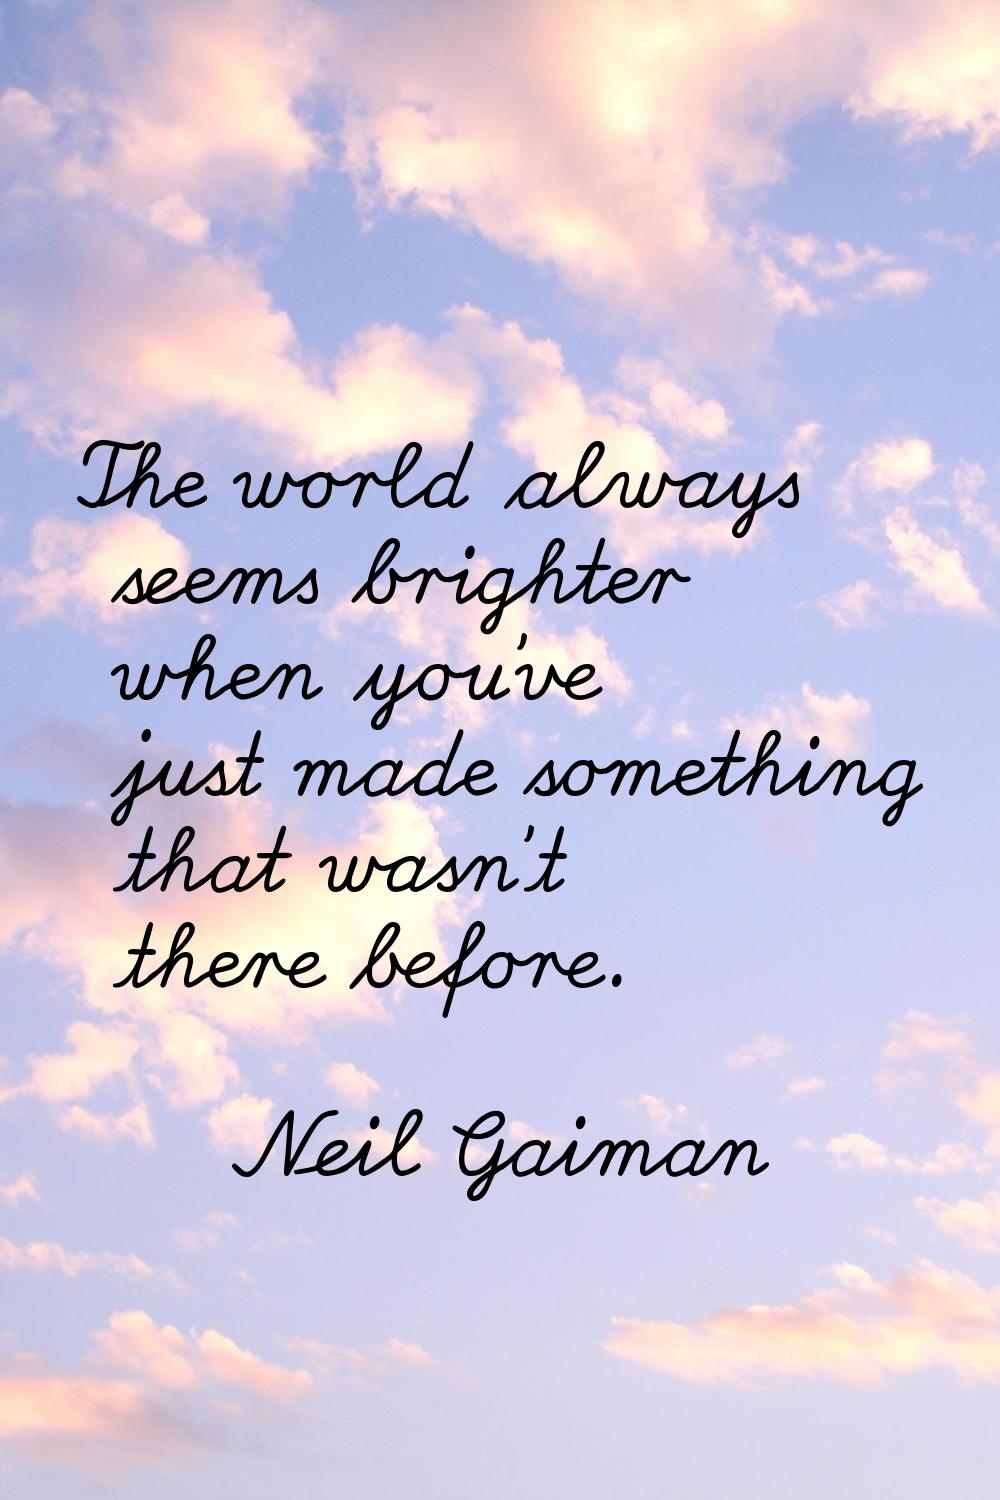 The world always seems brighter when you've just made something that wasn't there before.